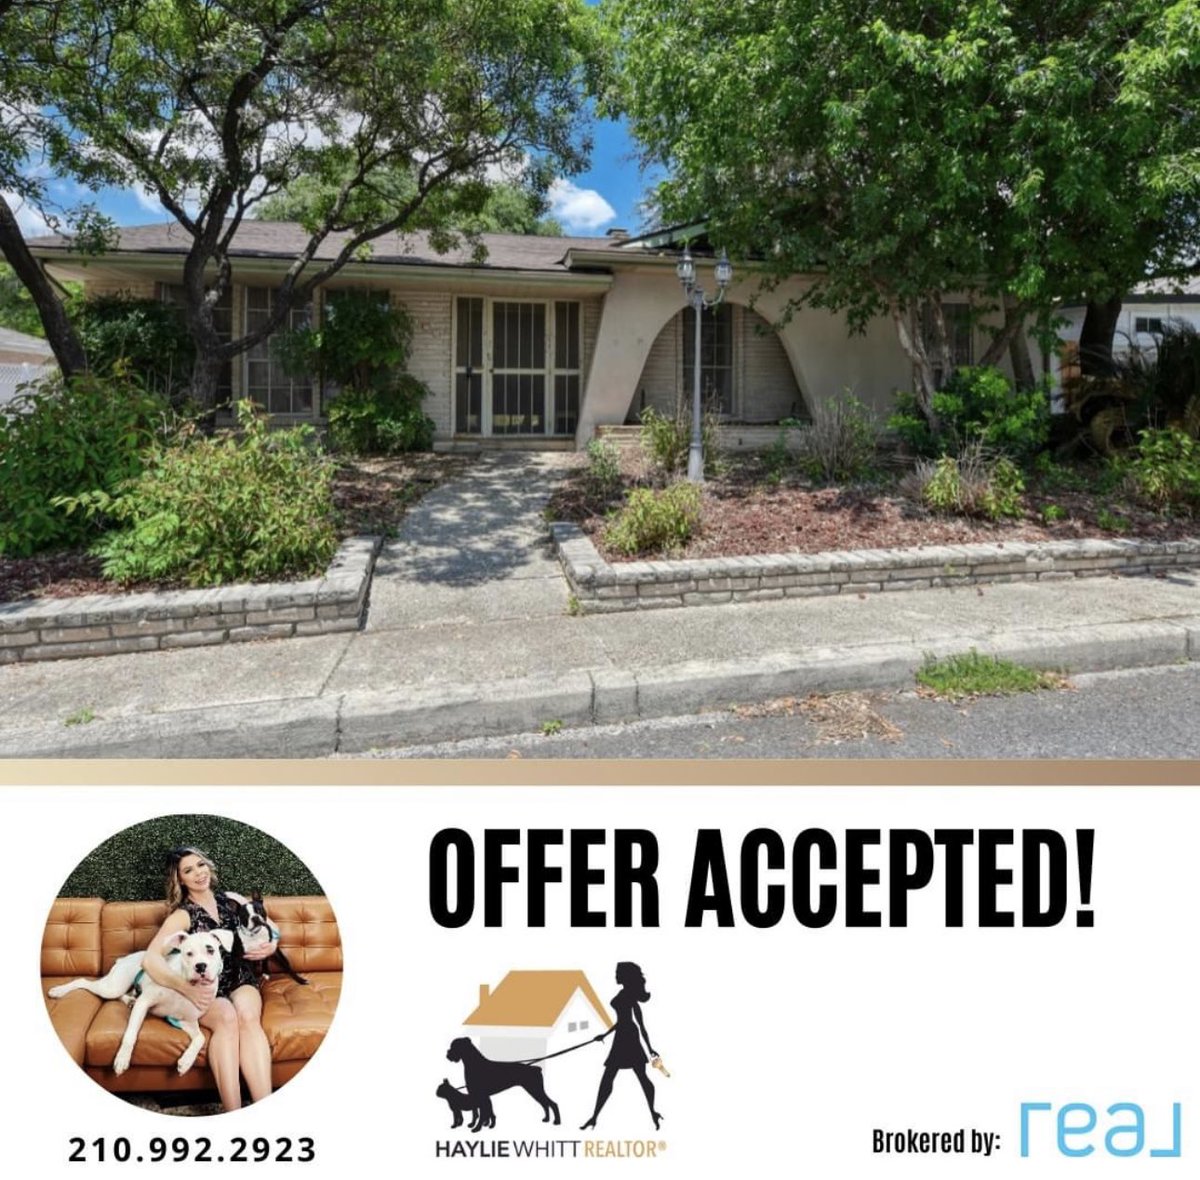 Happy to share my clients offer was chosen in a multiple offer situation! 🥳🏡

#sanantoniorealtor #sanantoniorealestate #firsttimehomebuyer #txrealestate #txrealtor #closingday #realestatelife #realtor #newhome #realtorlife #sanantonio #realestate